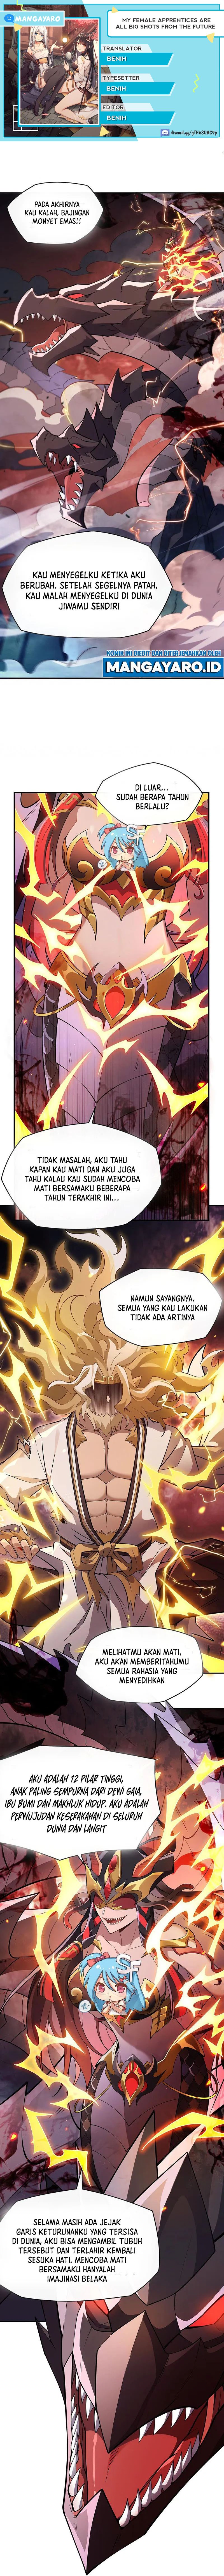 Dilarang COPAS - situs resmi www.mangacanblog.com - Komik my female apprentices are all big shots from the future 233 - chapter 233 234 Indonesia my female apprentices are all big shots from the future 233 - chapter 233 Terbaru 0|Baca Manga Komik Indonesia|Mangacan